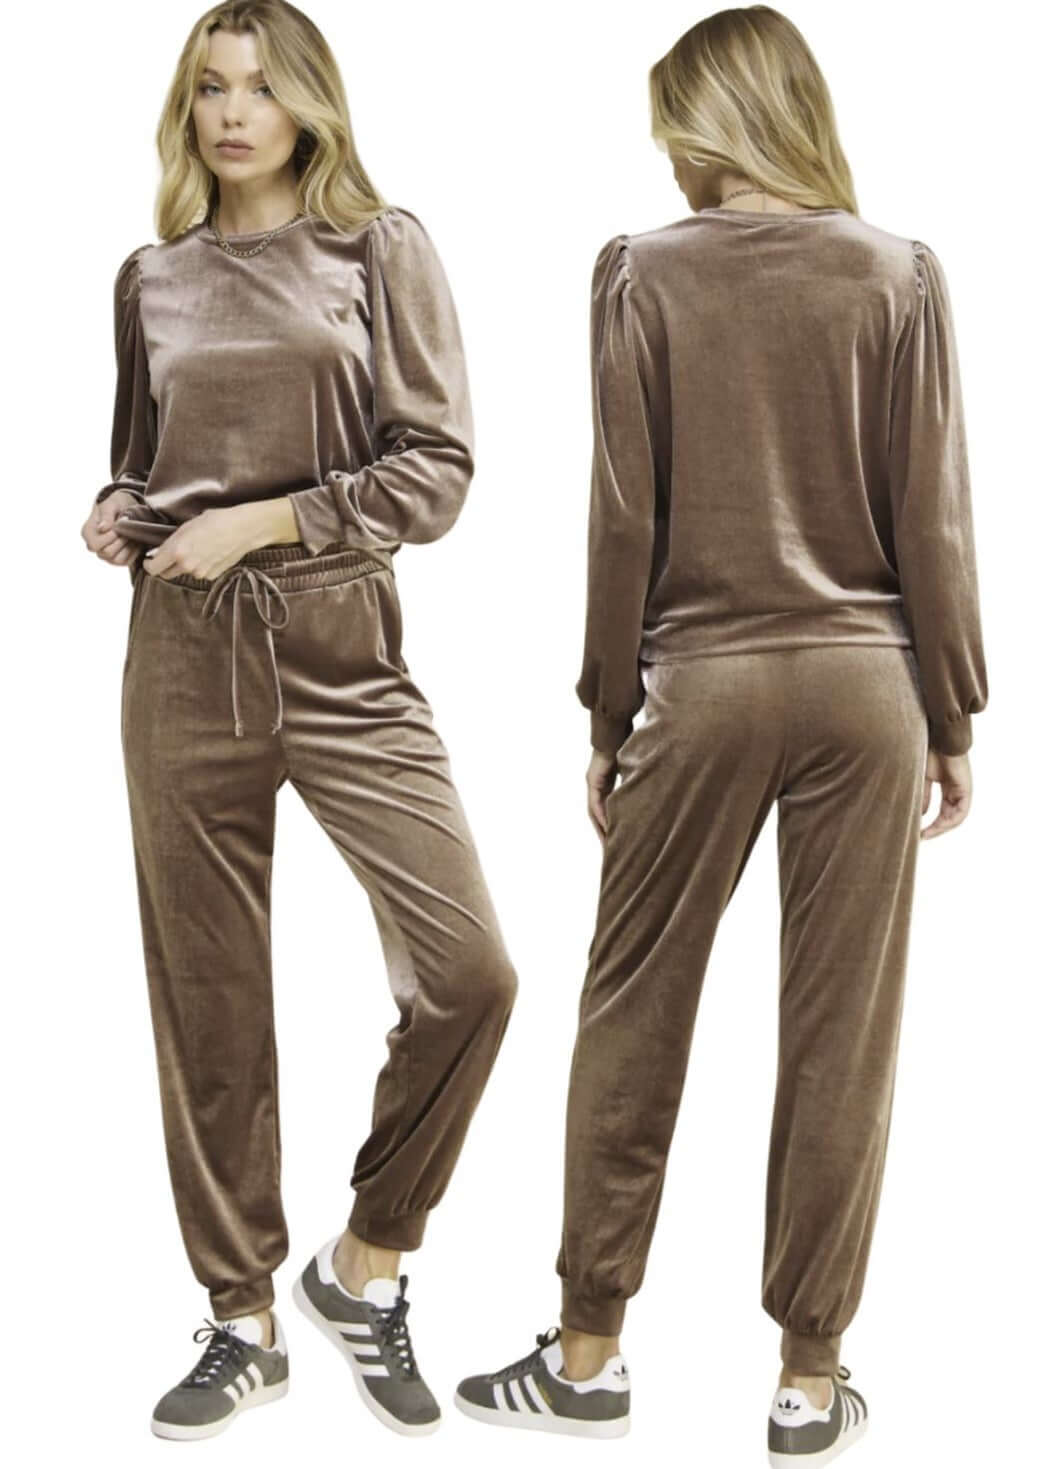 USA Made Women's Glam Velour Relaxed Fit Track Suit with Puff Sleeves in Taupe | Classy Cozy Cool Women's Made in USA Boutique